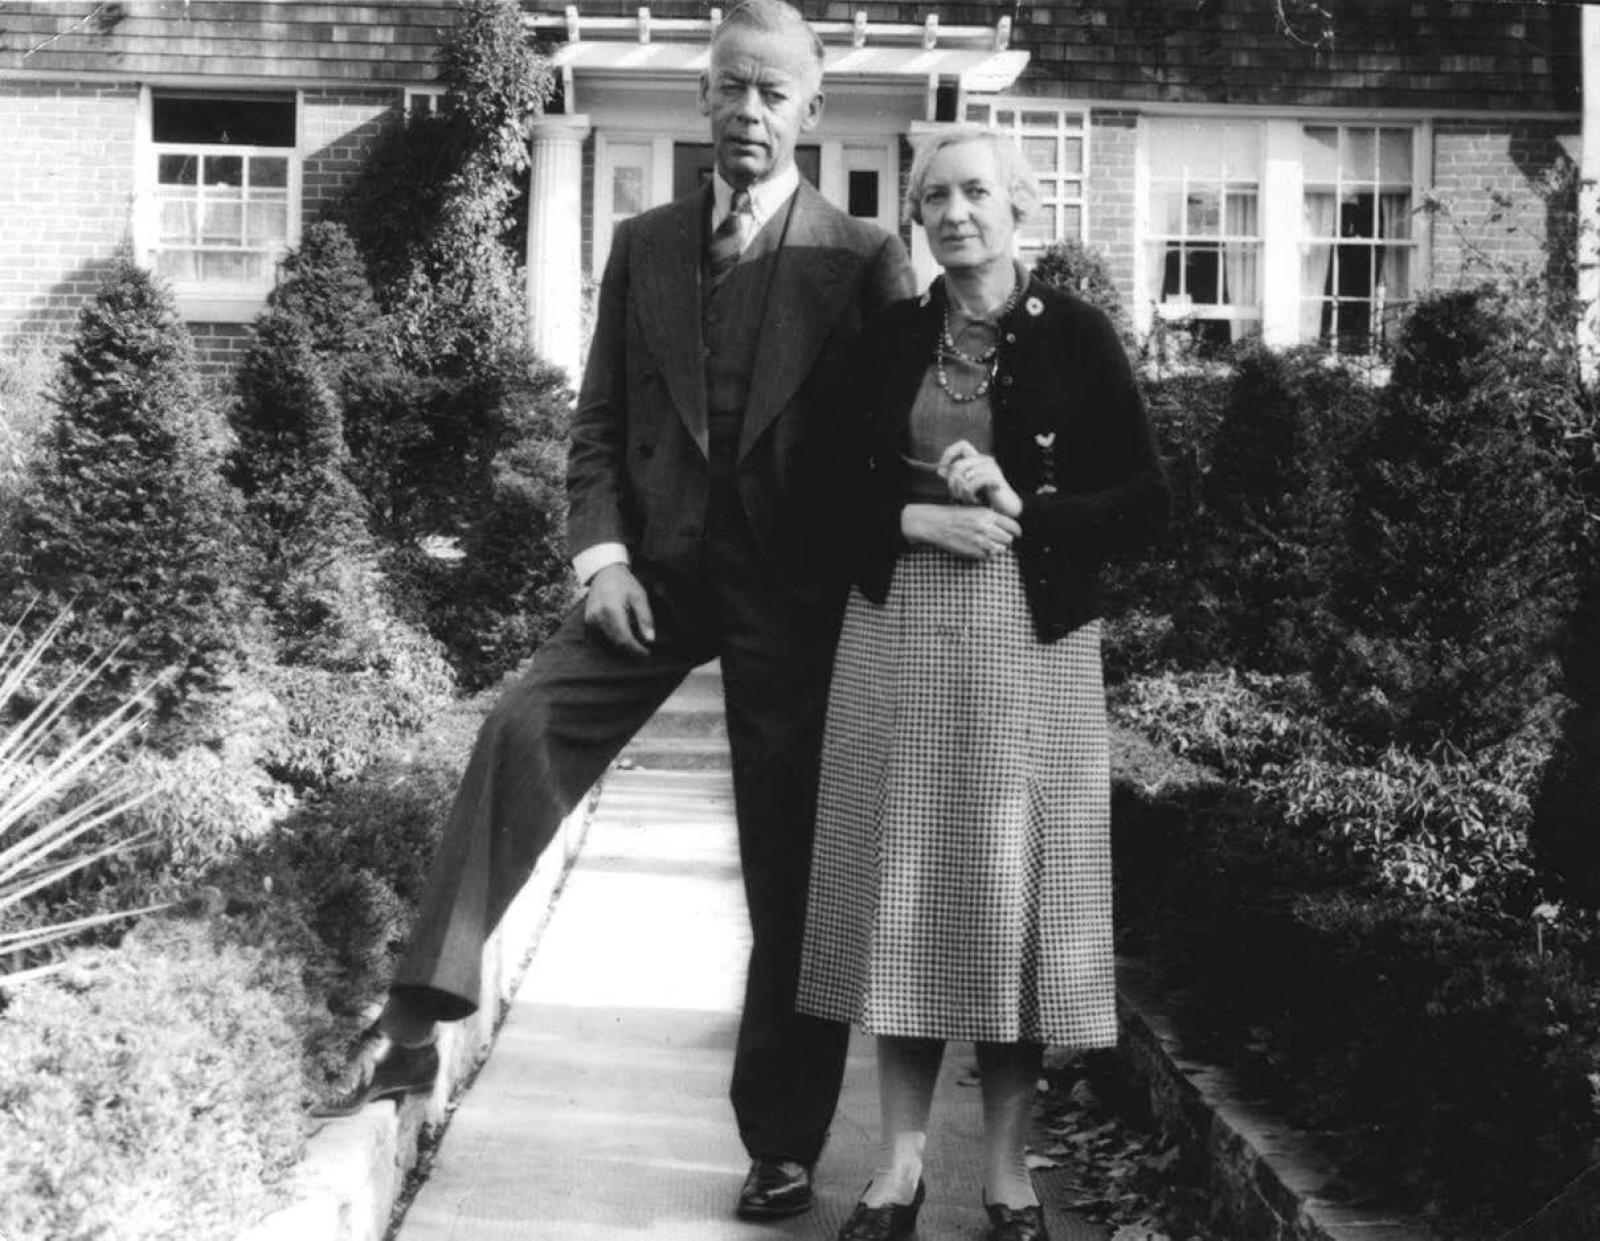 Howard and Lorrie Dunington-Grubb in the late 1930s